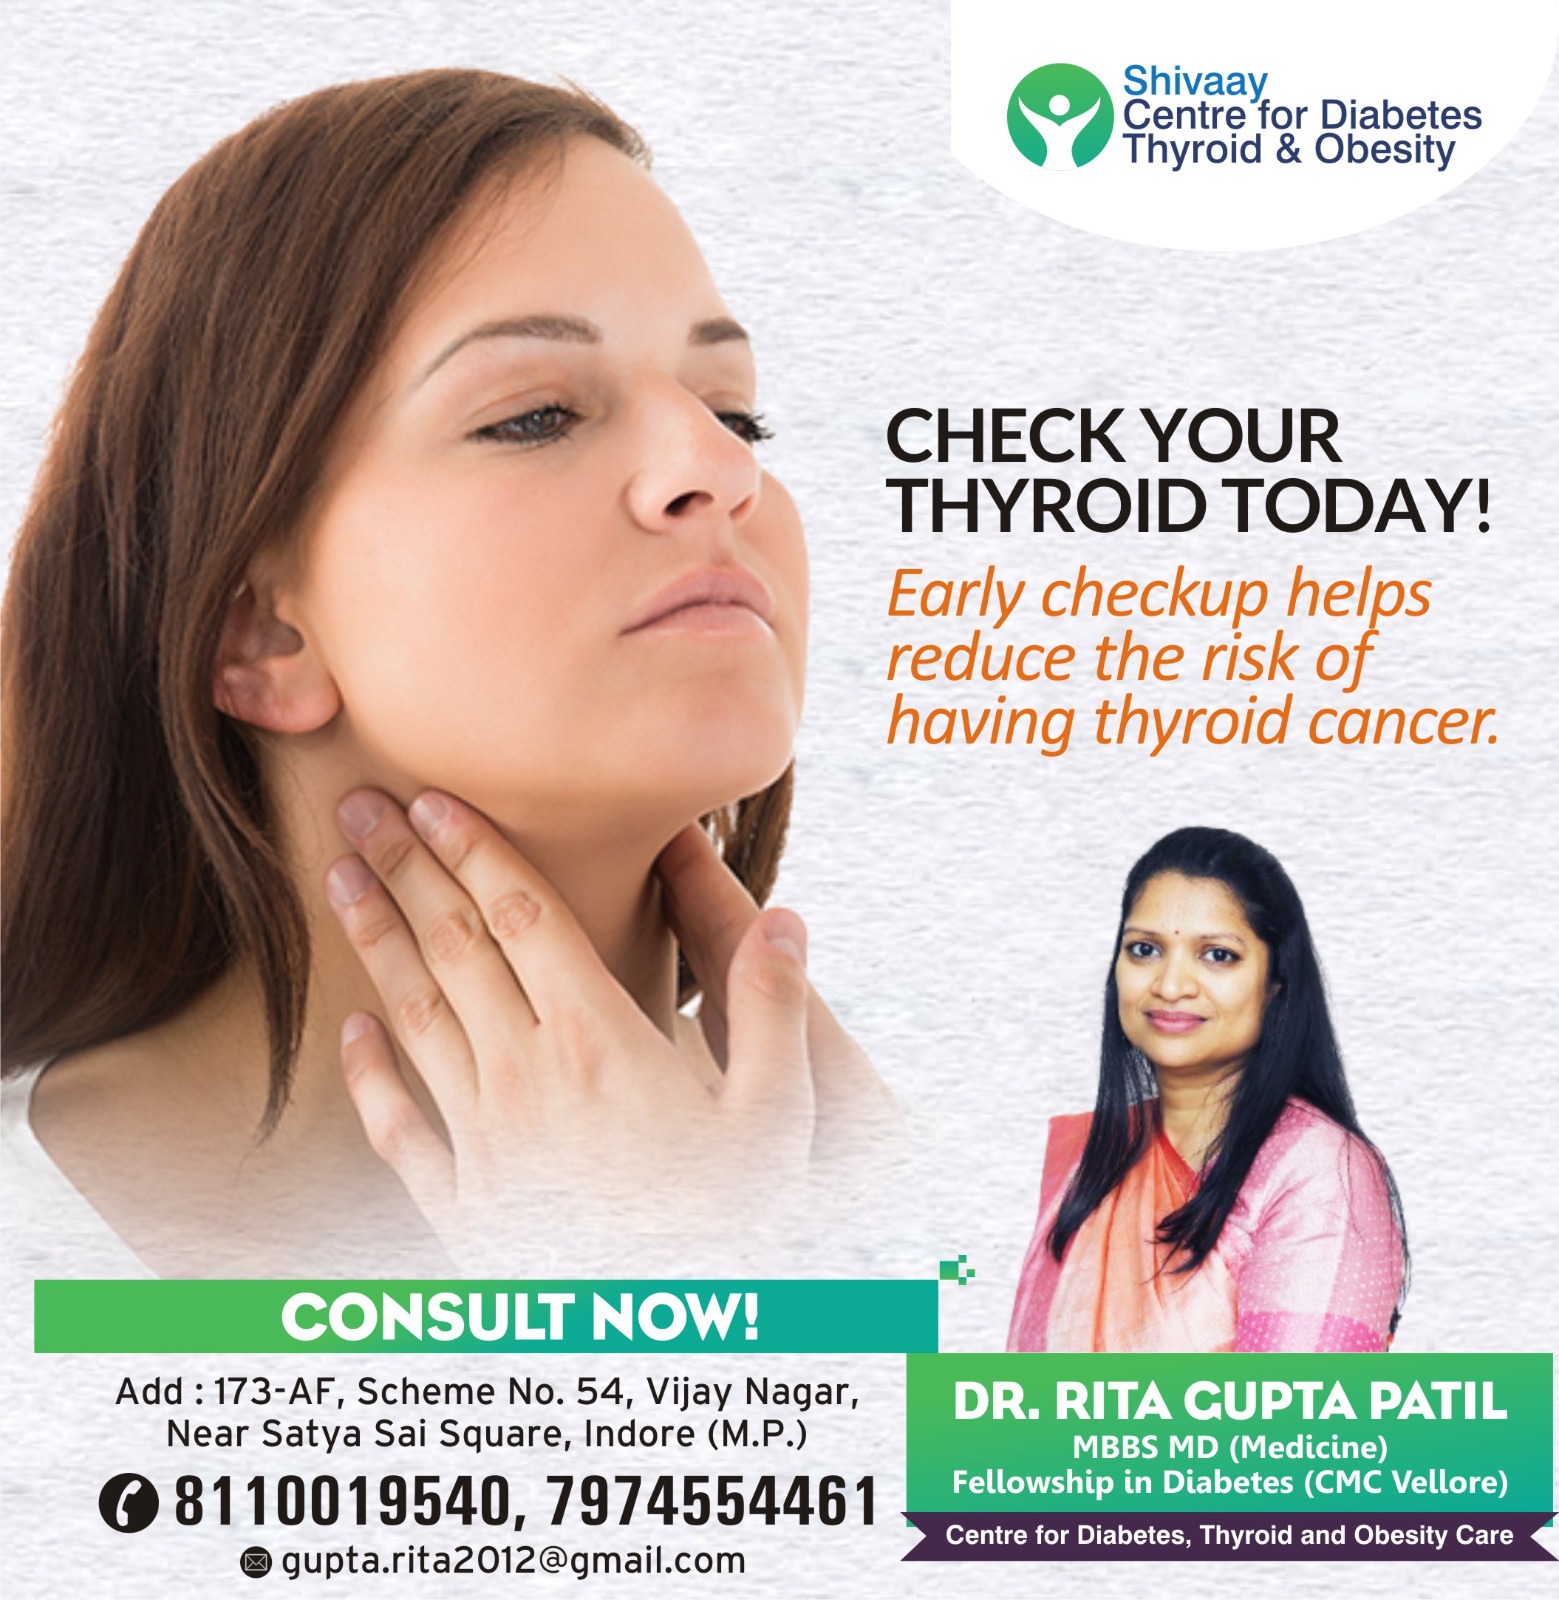 Mayra skin and aesthetics clinic  Get Best Skin Hair and Nail Care  Treatment at Mayra Skin and Aesthetic Clinic In Indore by Dr KL Patidar  For more Visit Now httpswwwmayraskincliniccombookanappointment 